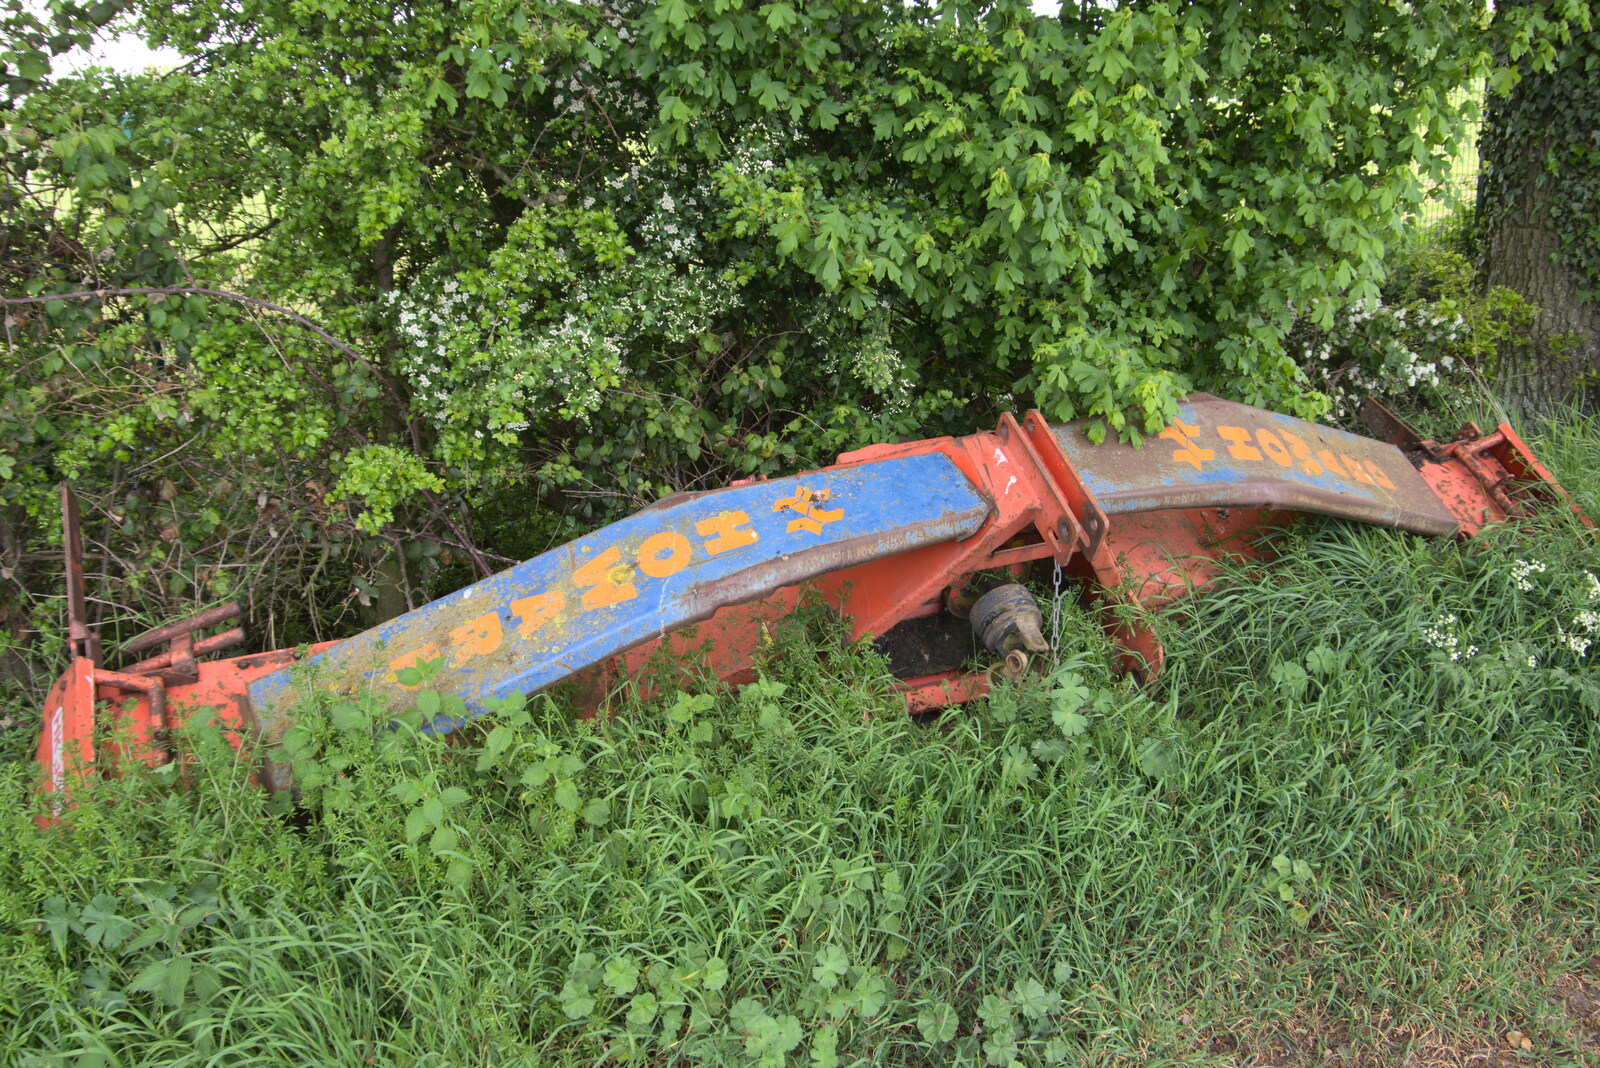 Some more derelict farm machinery from The Quest for Rapsy Tapsy Lane, Eye, Suffolk - 6th May 2020